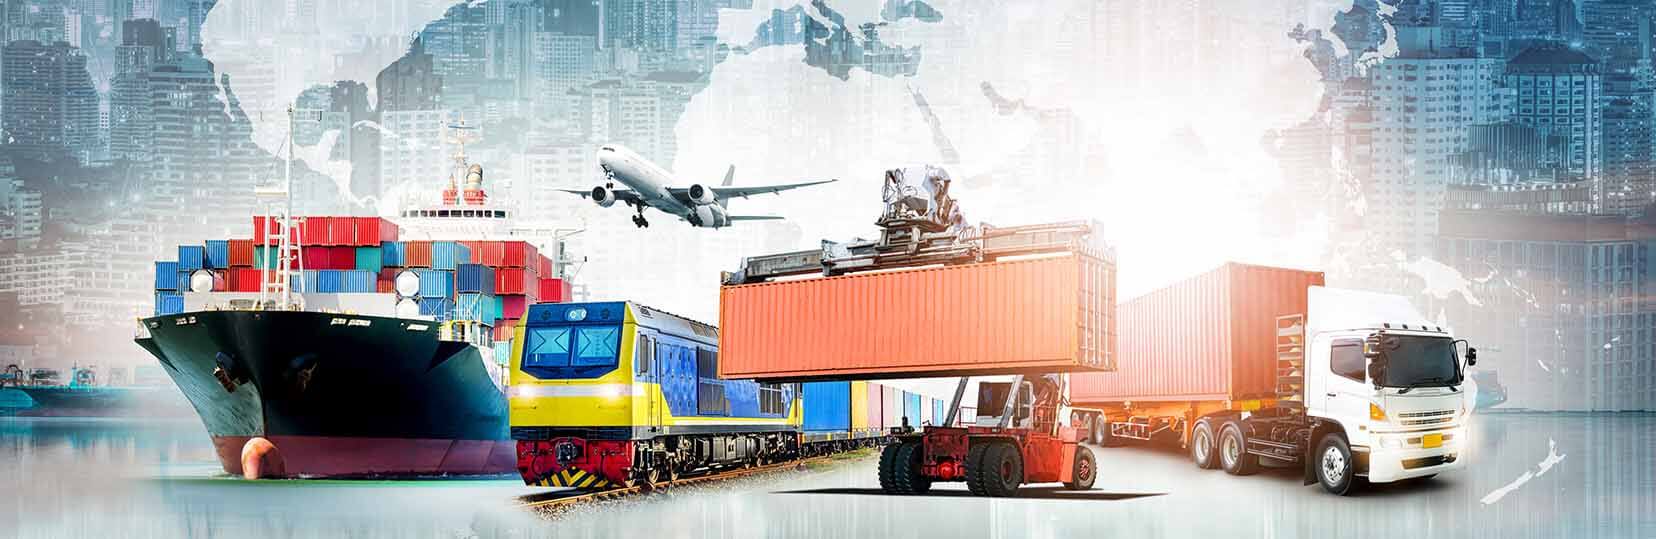 A poster with different kinds of carrier vehicles, such as cargo ship, train, plane, and trailers